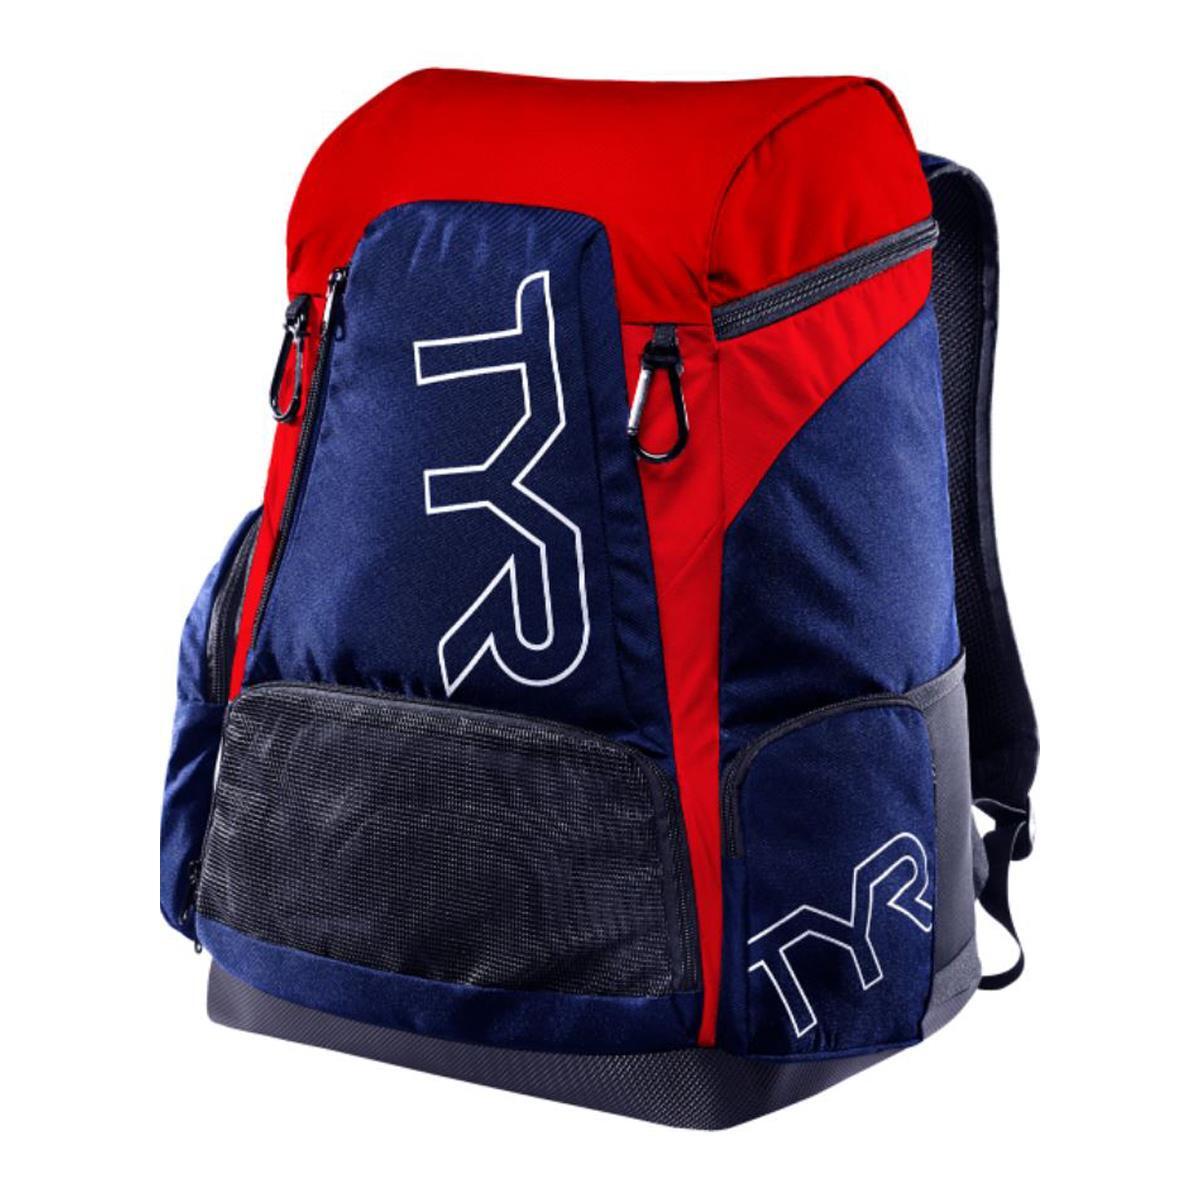 TYR Alliance Backpack - Navy Blue /Red 1/2